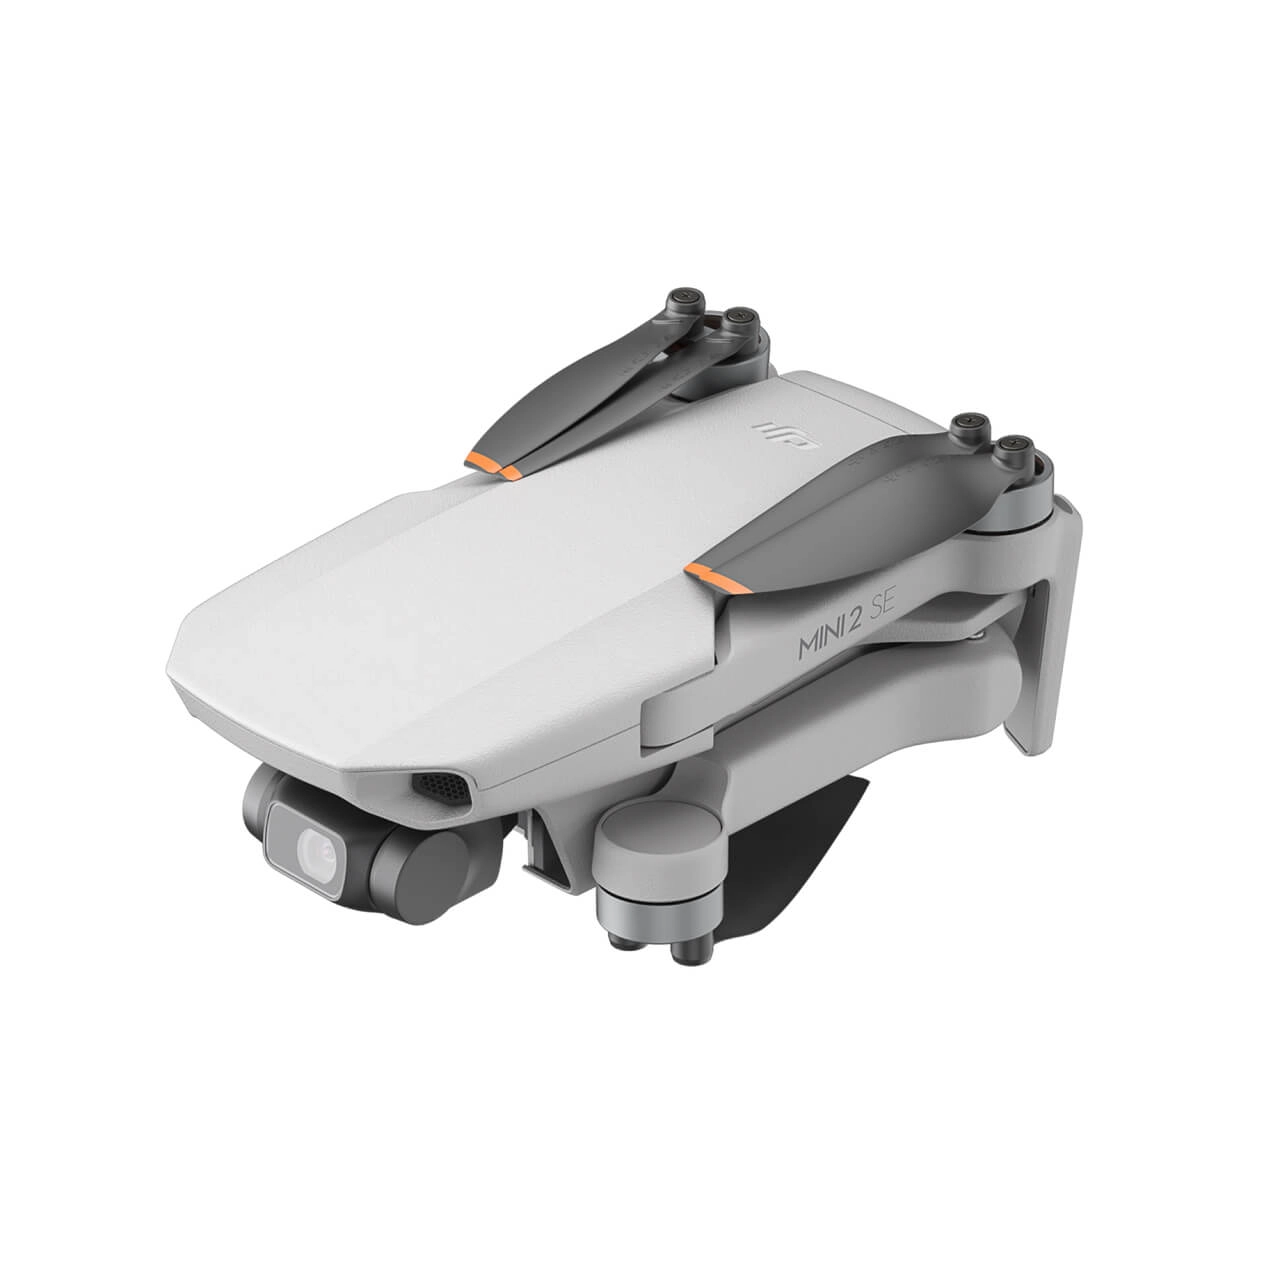 DJI's Mini 2 SE Makes Buying a Beginner Drone Less Expensive